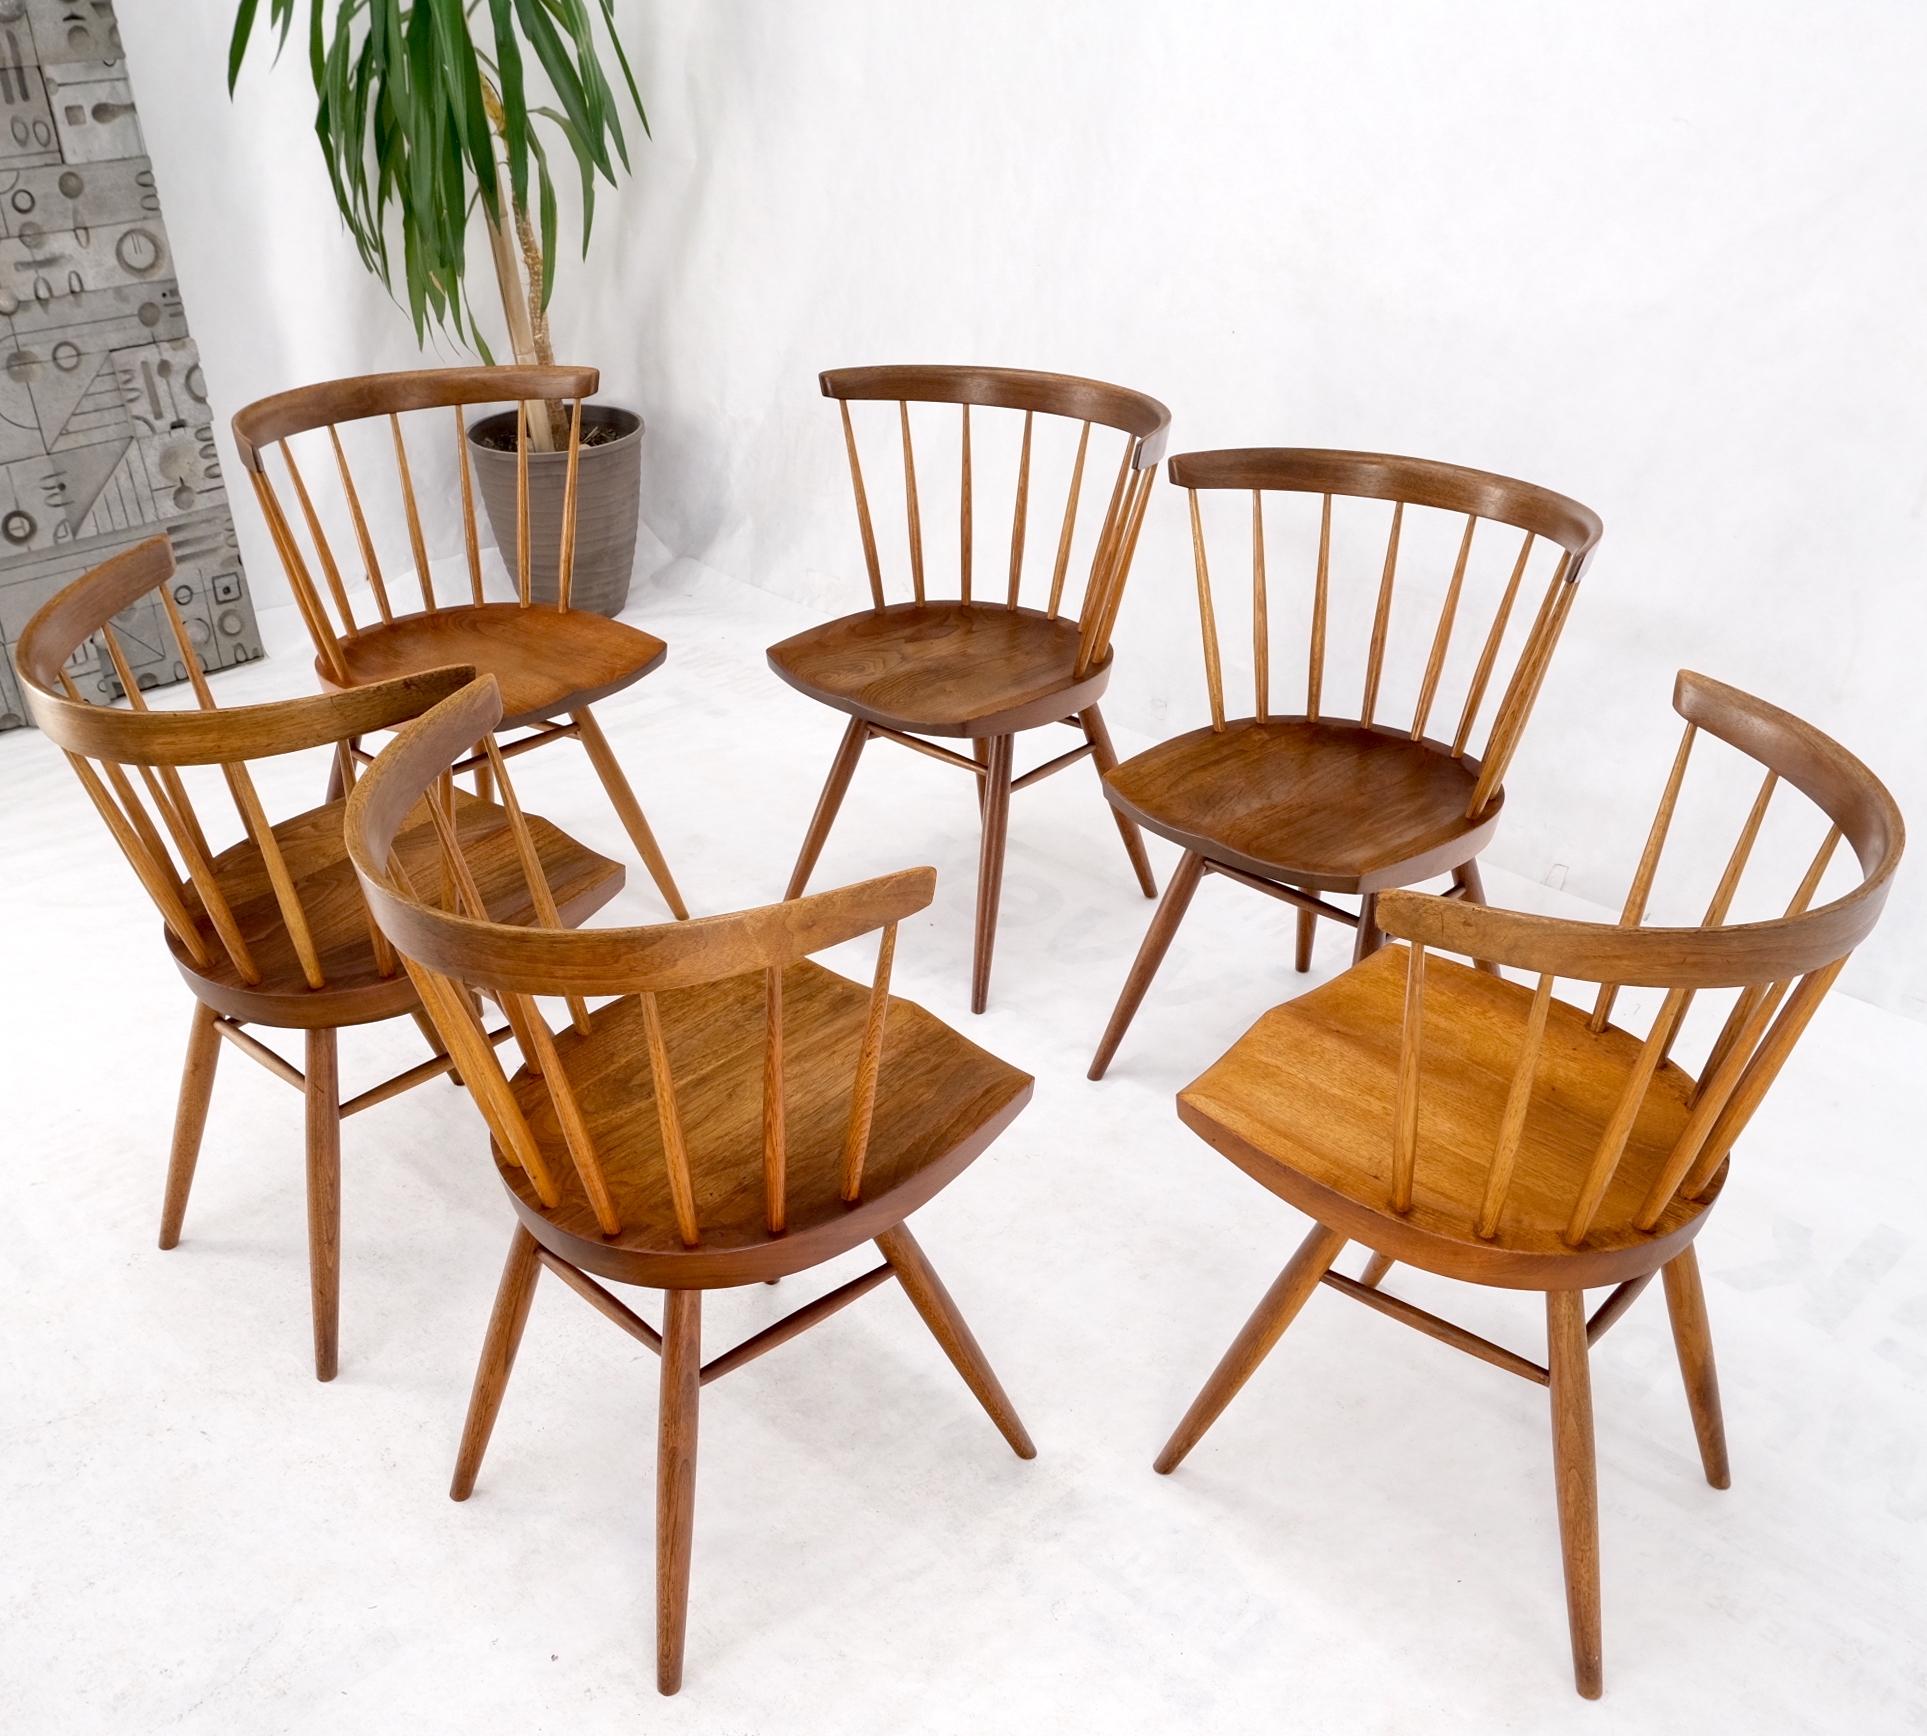 Set of 6 Oiled Walnut Spindle Back Dining Chairs by George Nakashima For Sale 7